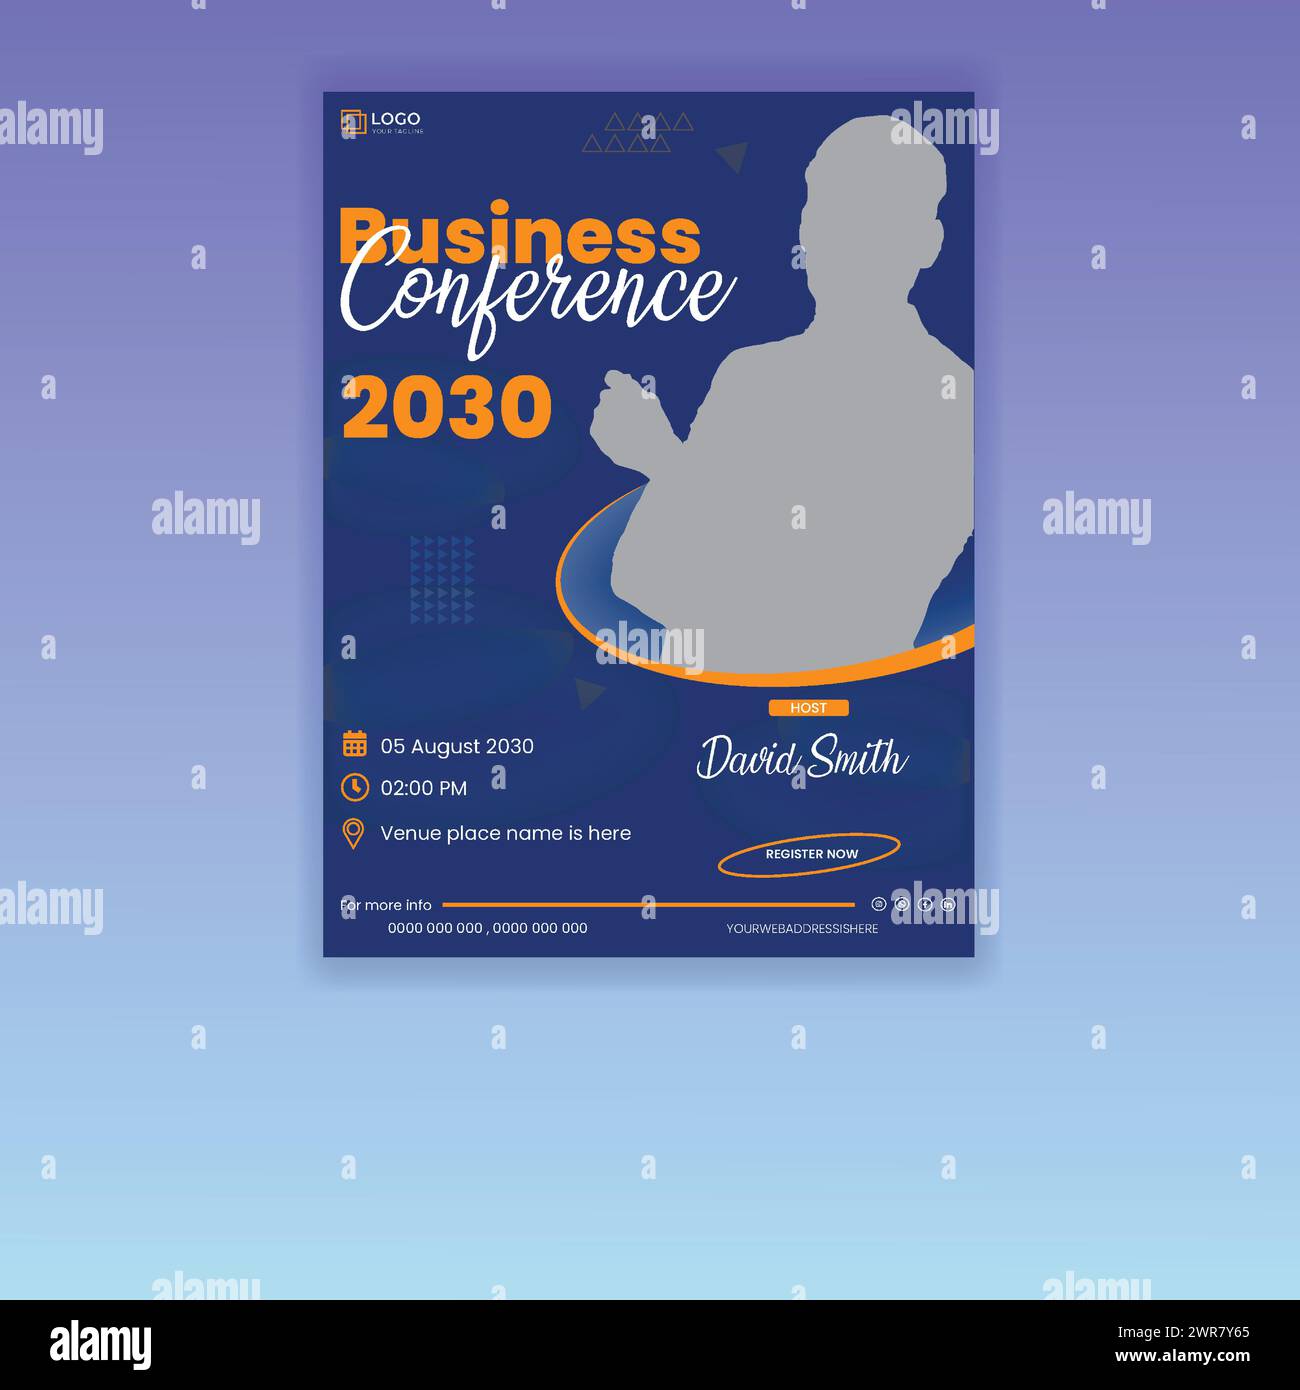 Business Conference Flyer poster Template Design. latest corporate creative conference  design template Stock Vector